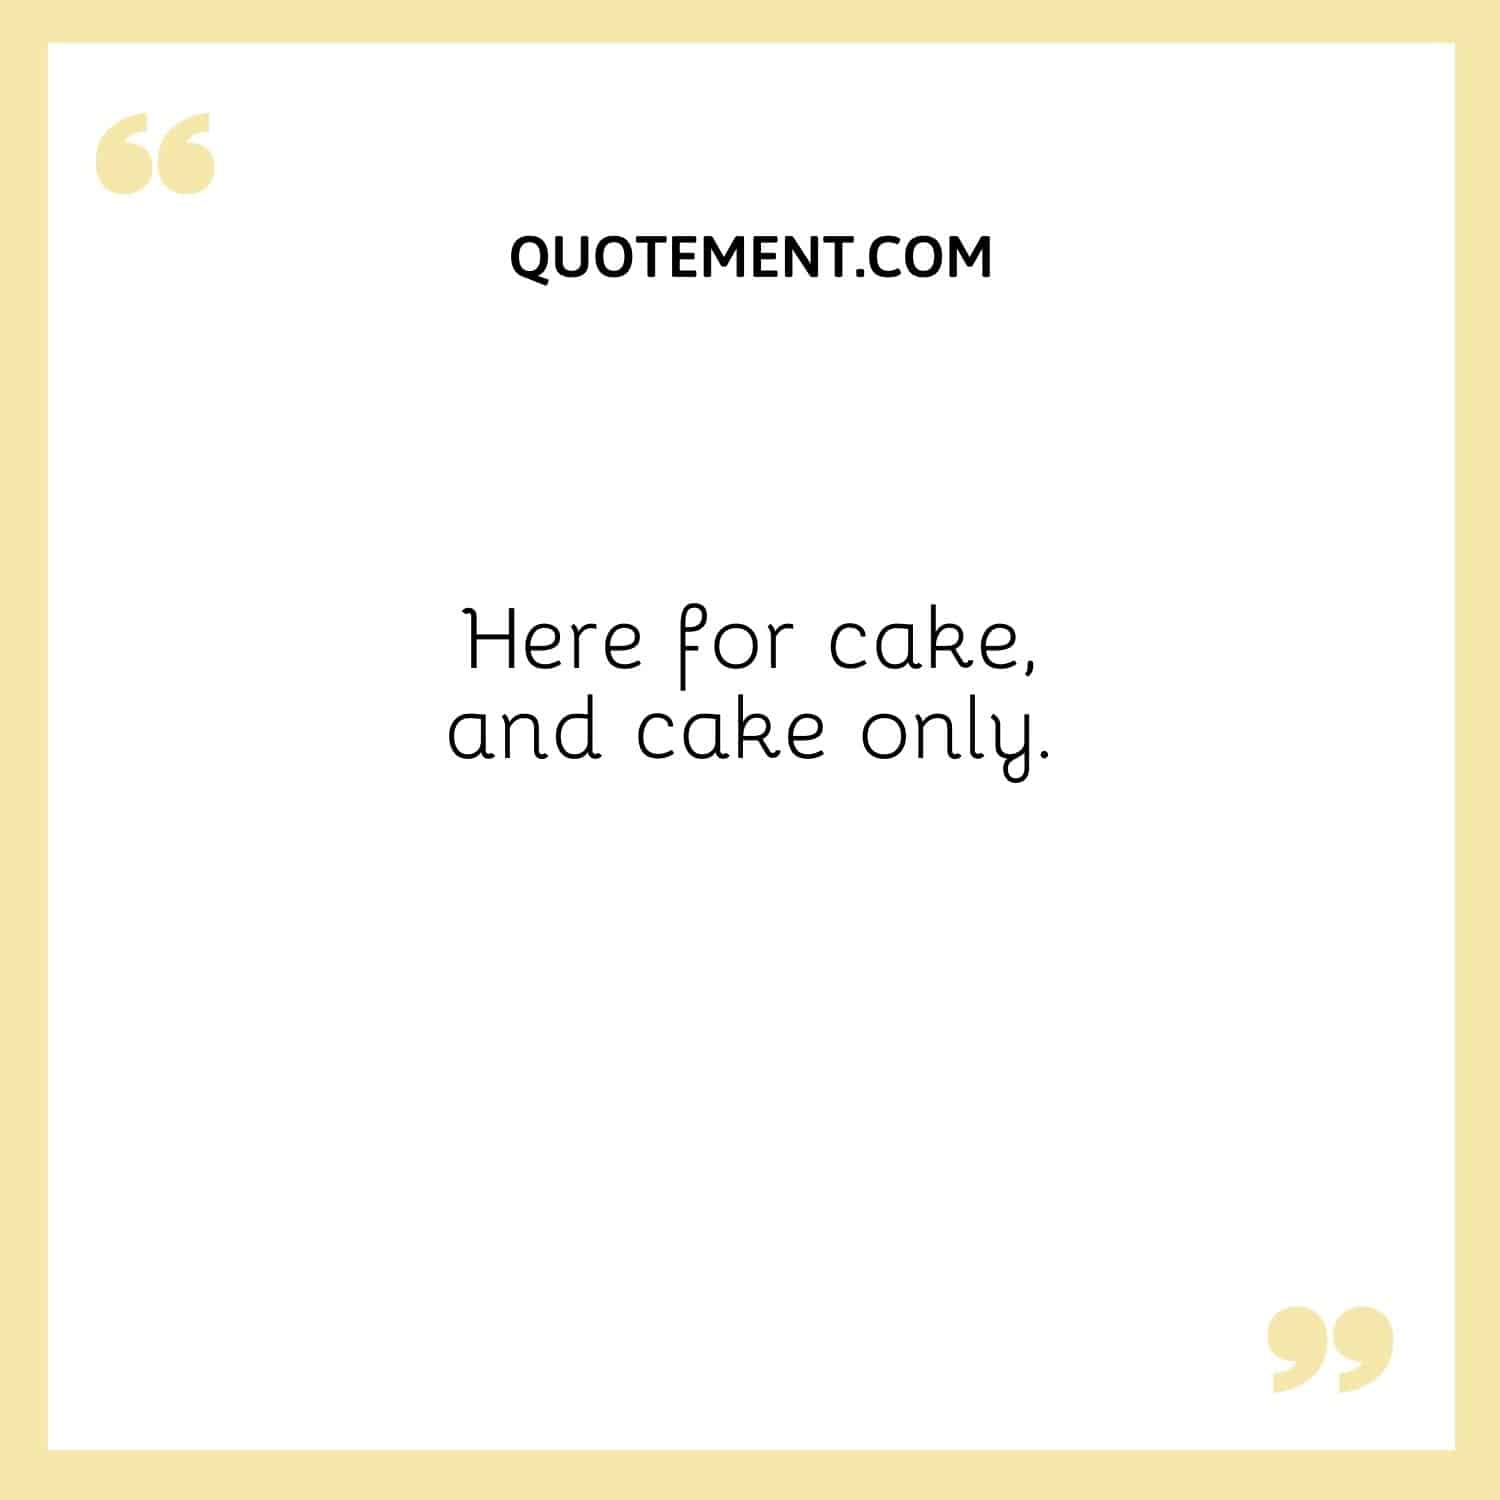 Here for cake, and cake only.